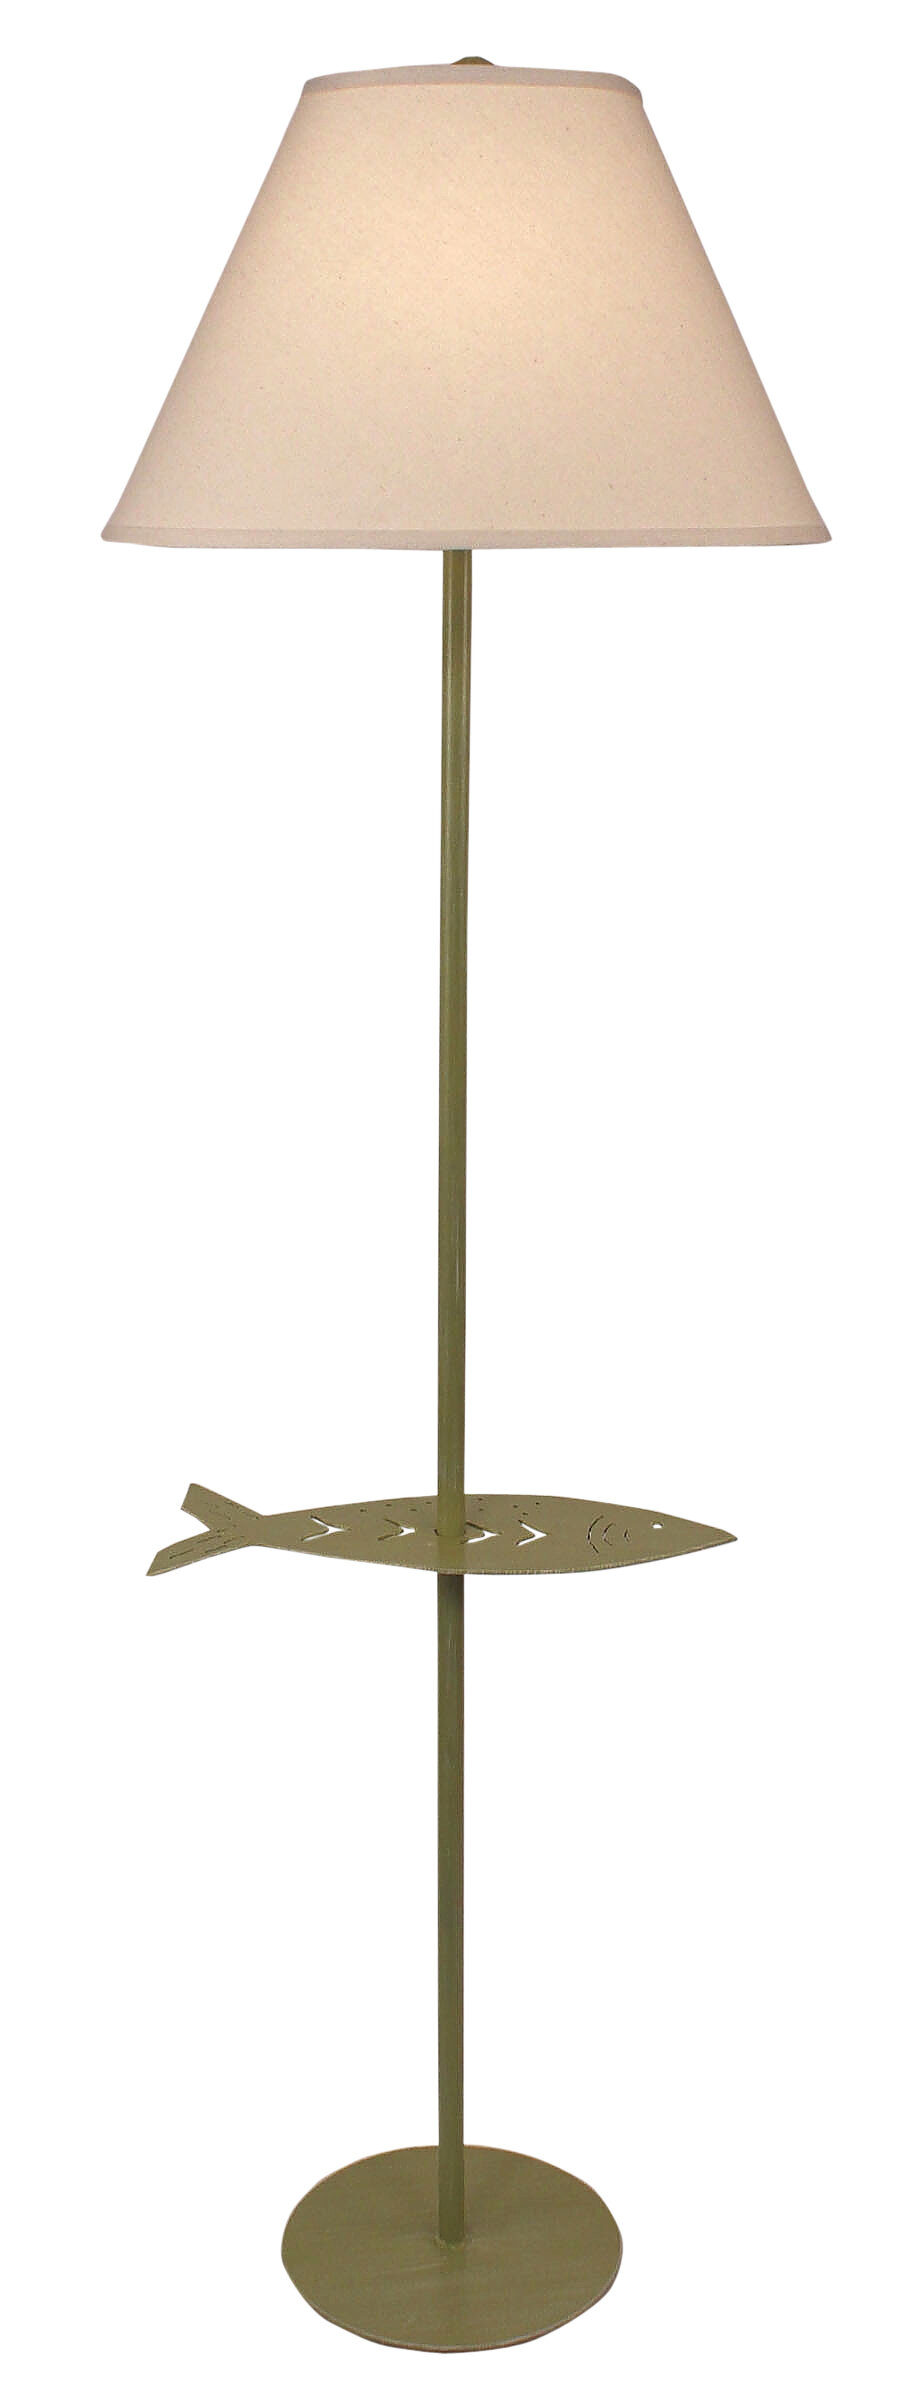 Highland Dunes Irving Place Drink Table Tray 585 Floor Lamp intended for dimensions 900 X 2400